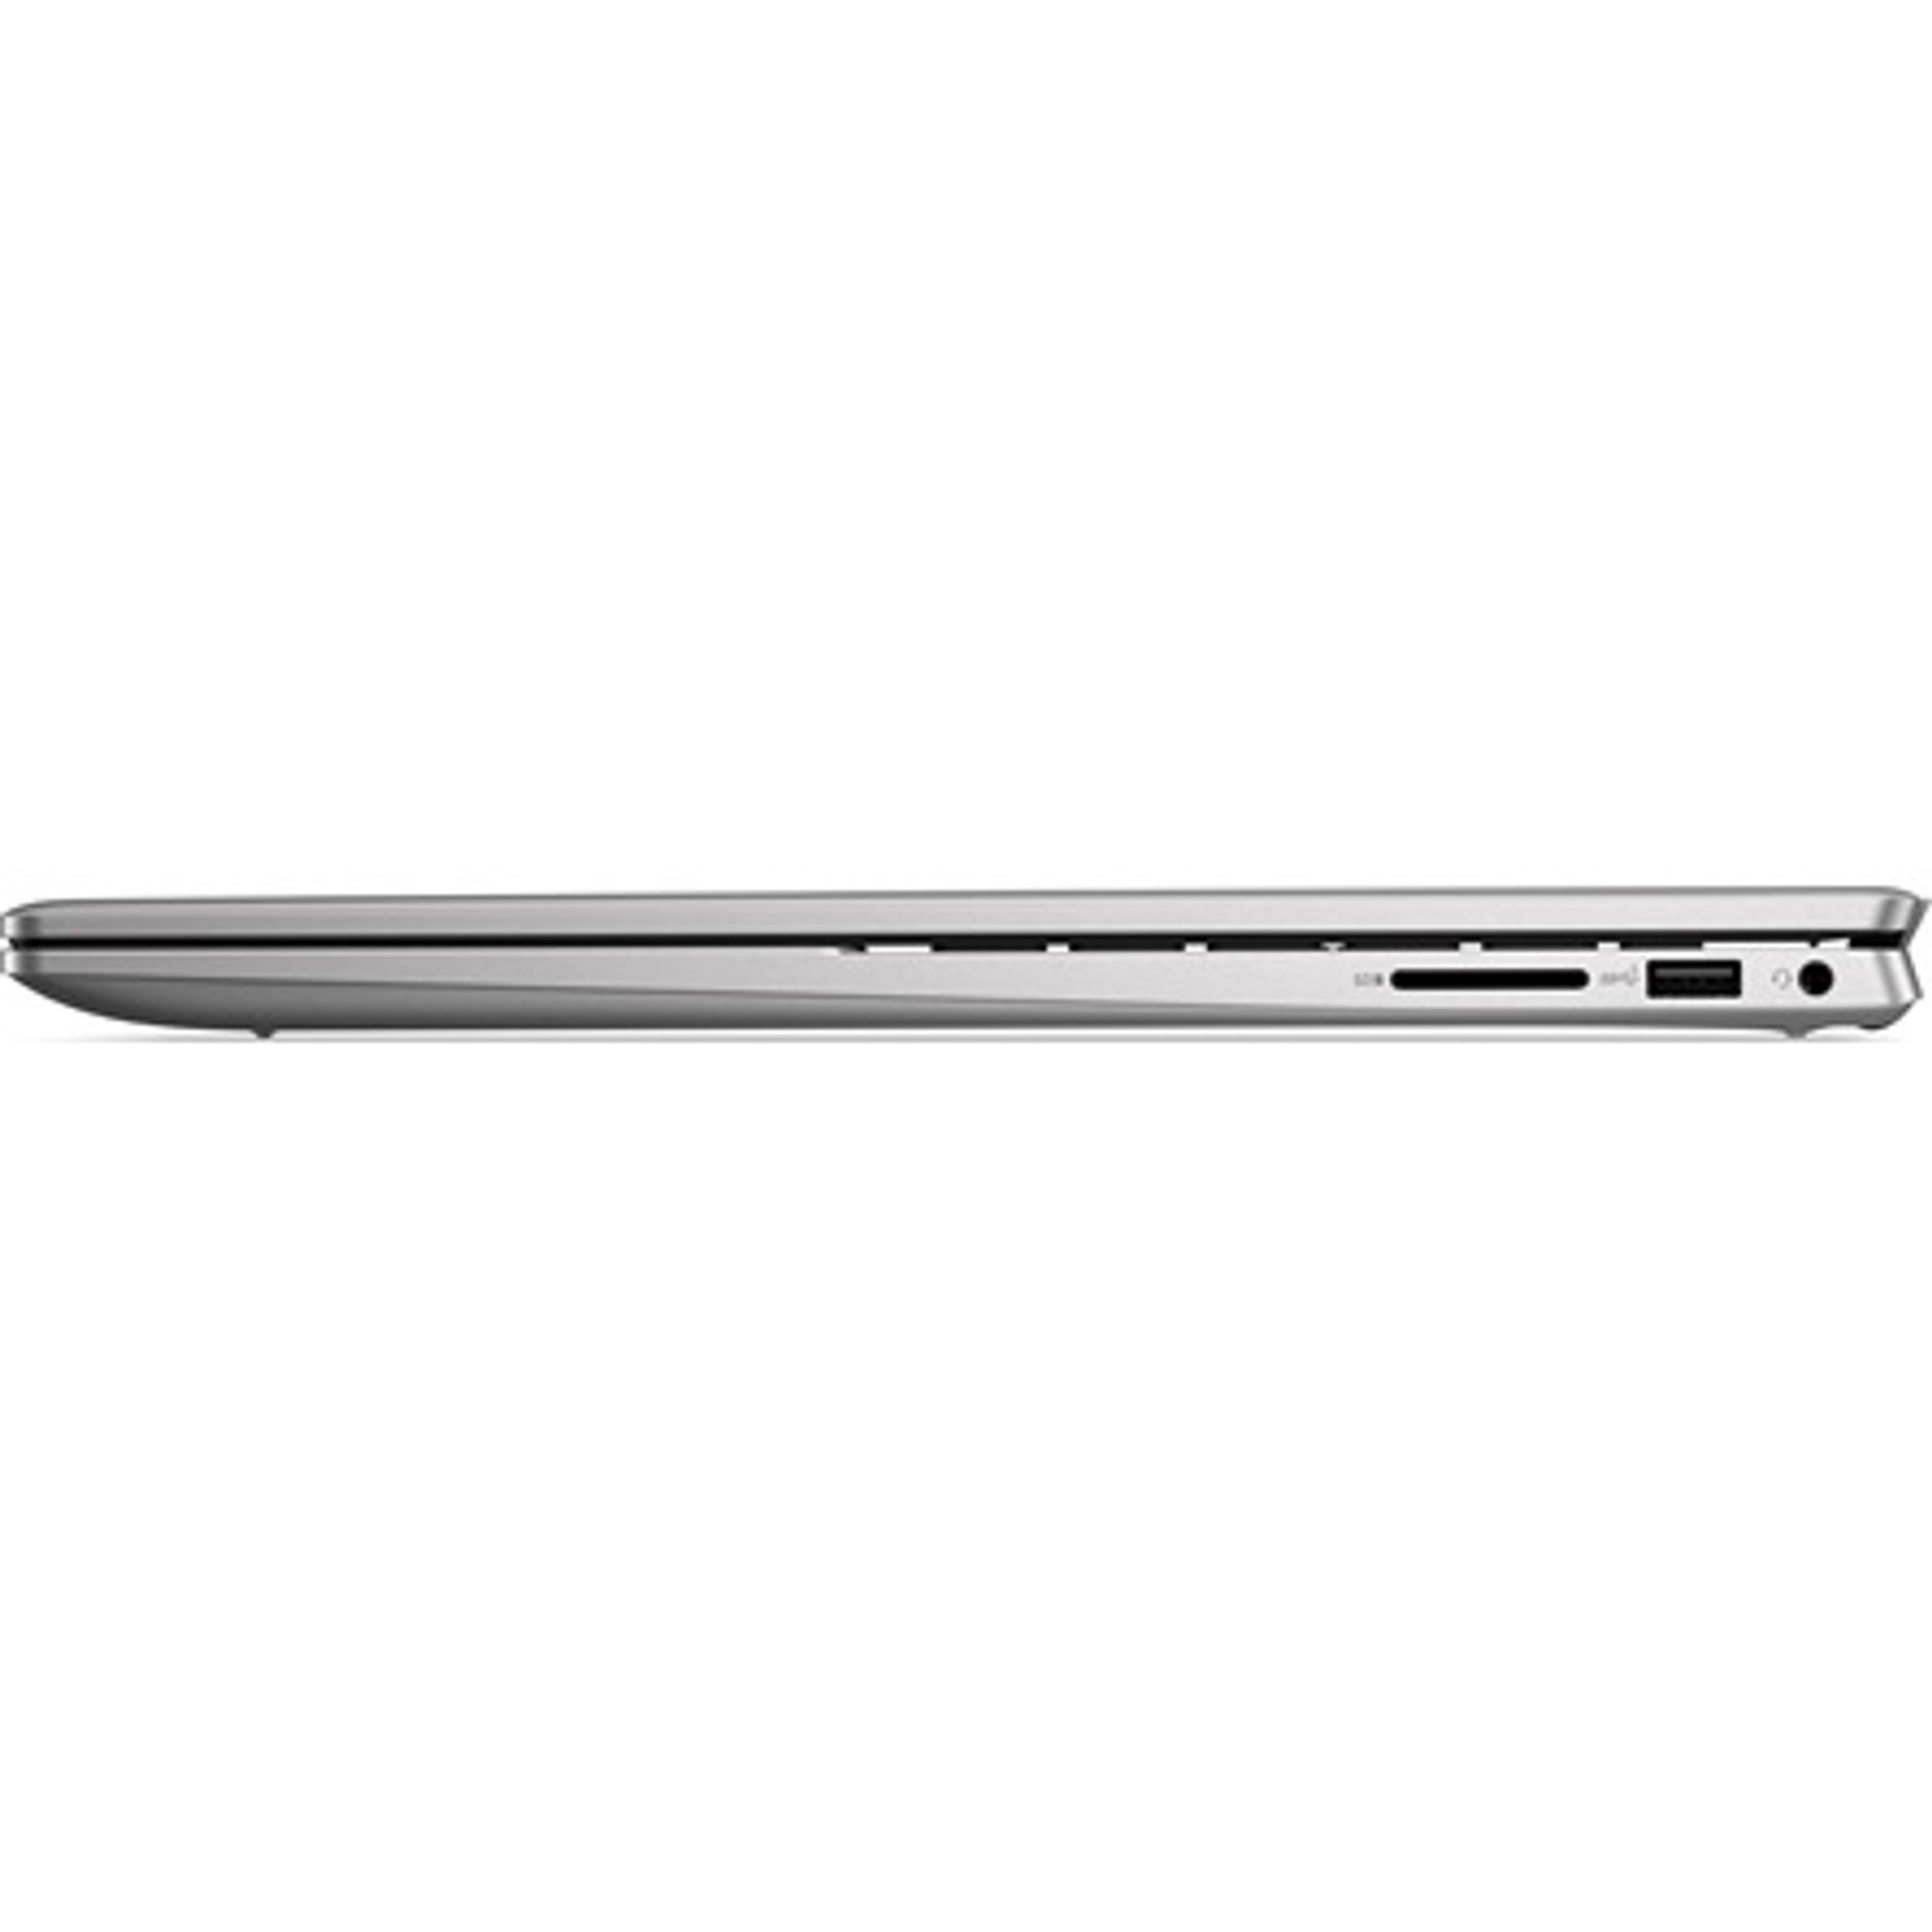 DELL 5630_336174 Laptop / Notebook 4